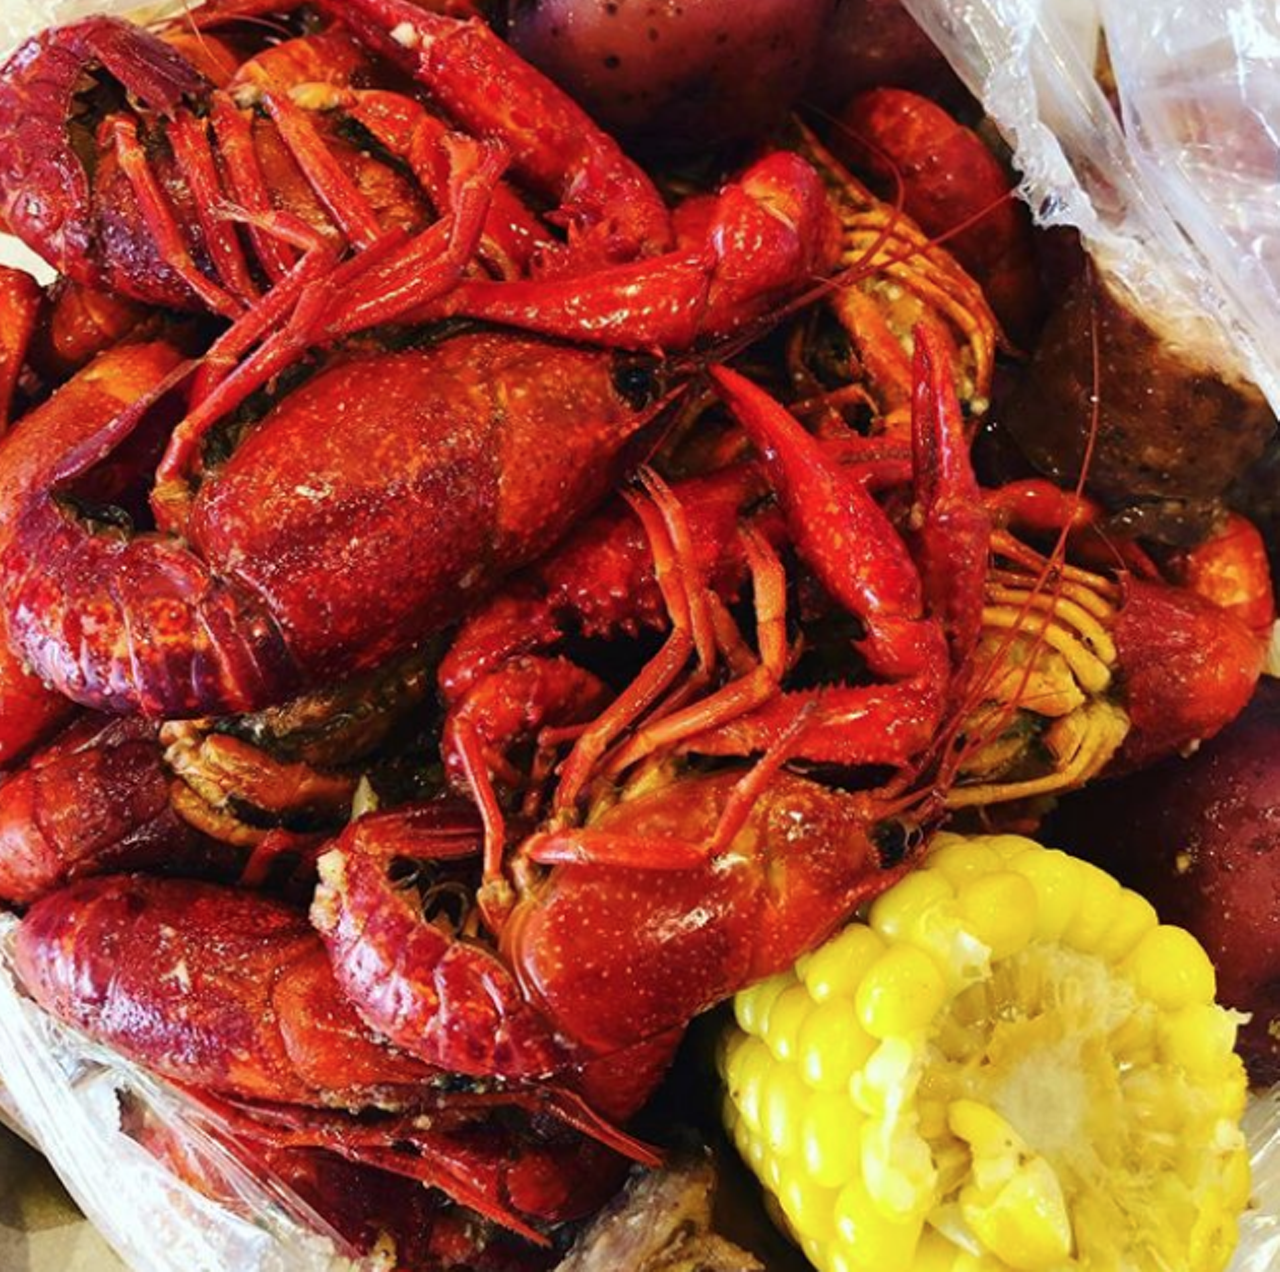 Smashin Crab
Multiple locations, smashincrab.com
Louisiana-style seafood awaits you over at Smashin Crab. The obvious choice is the crawfish boil, though you’re also more than welcome to enjoy this delicacy on a po’boy or in a basket (the tails, that is).
Photo via Instagram / mrsjsed